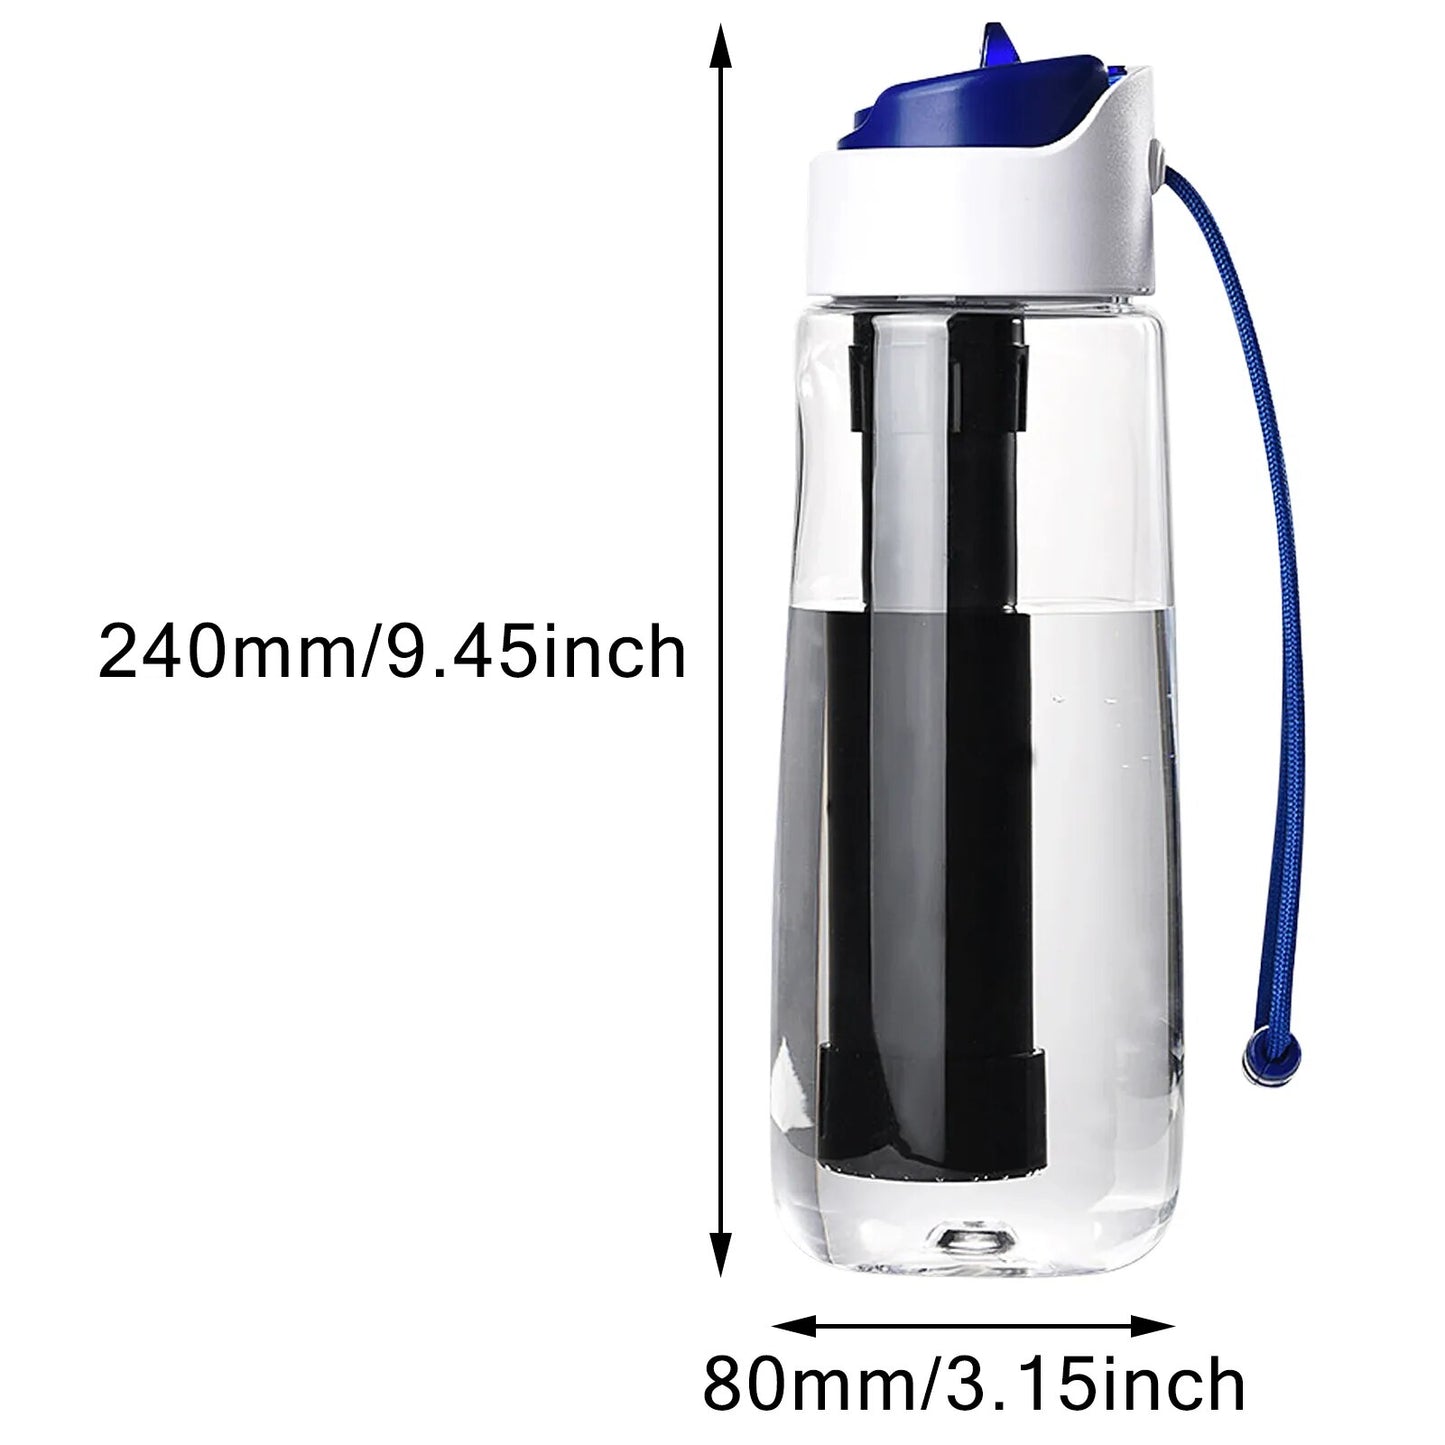 Outdoor Filtration Drinking Water Purifier